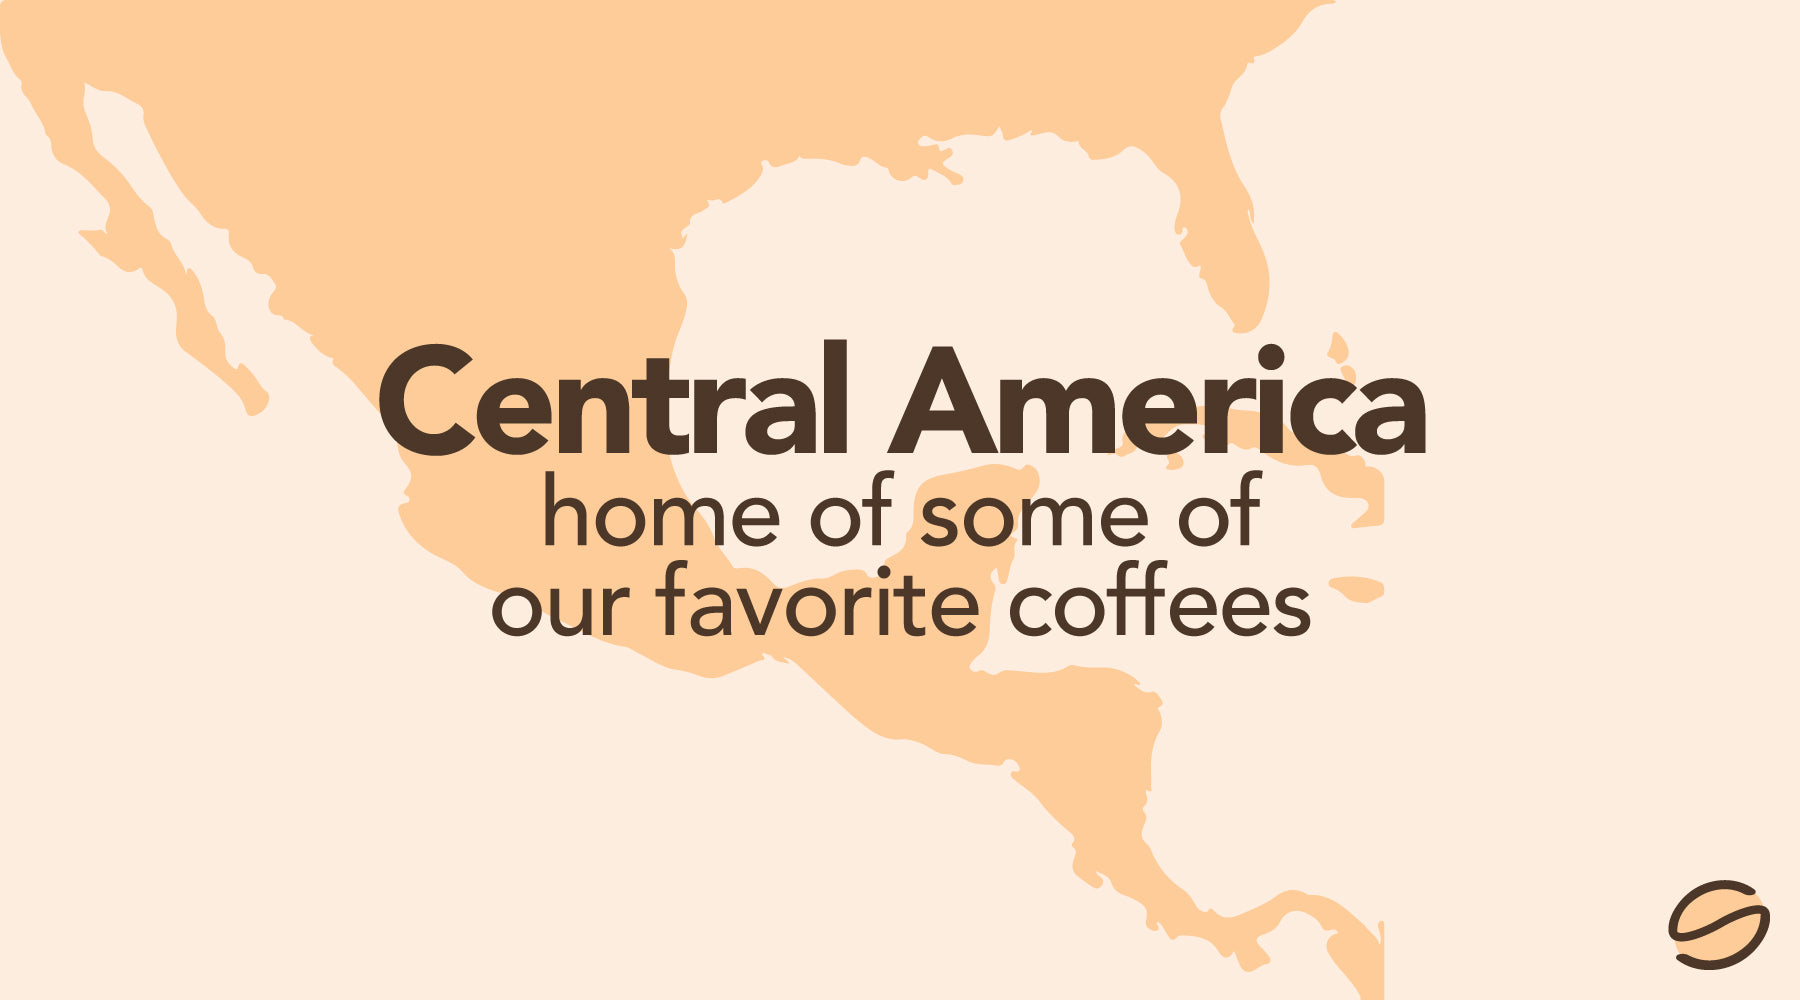 Central America: Home of Some of Our Favorite Coffees